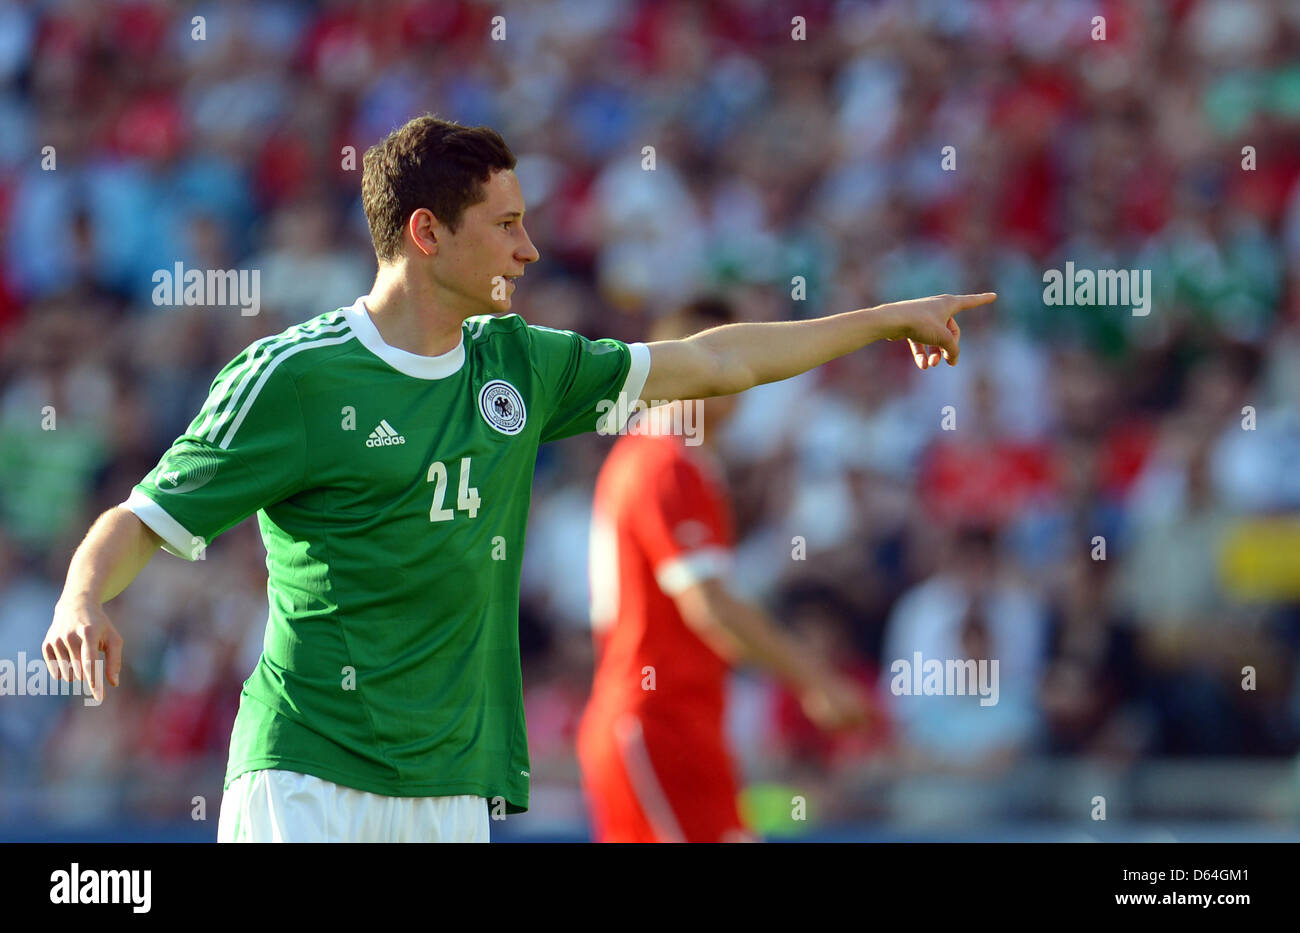 Germany's Julian Draxler gestures during the international friendly soccer match Switzerland vs Germany at the St. Jakob-Park stadium in Basel, Switzerland, 26 May 2012. Switzerland won 5:3. Photo: Andreas Gebert dpa Stock Photo